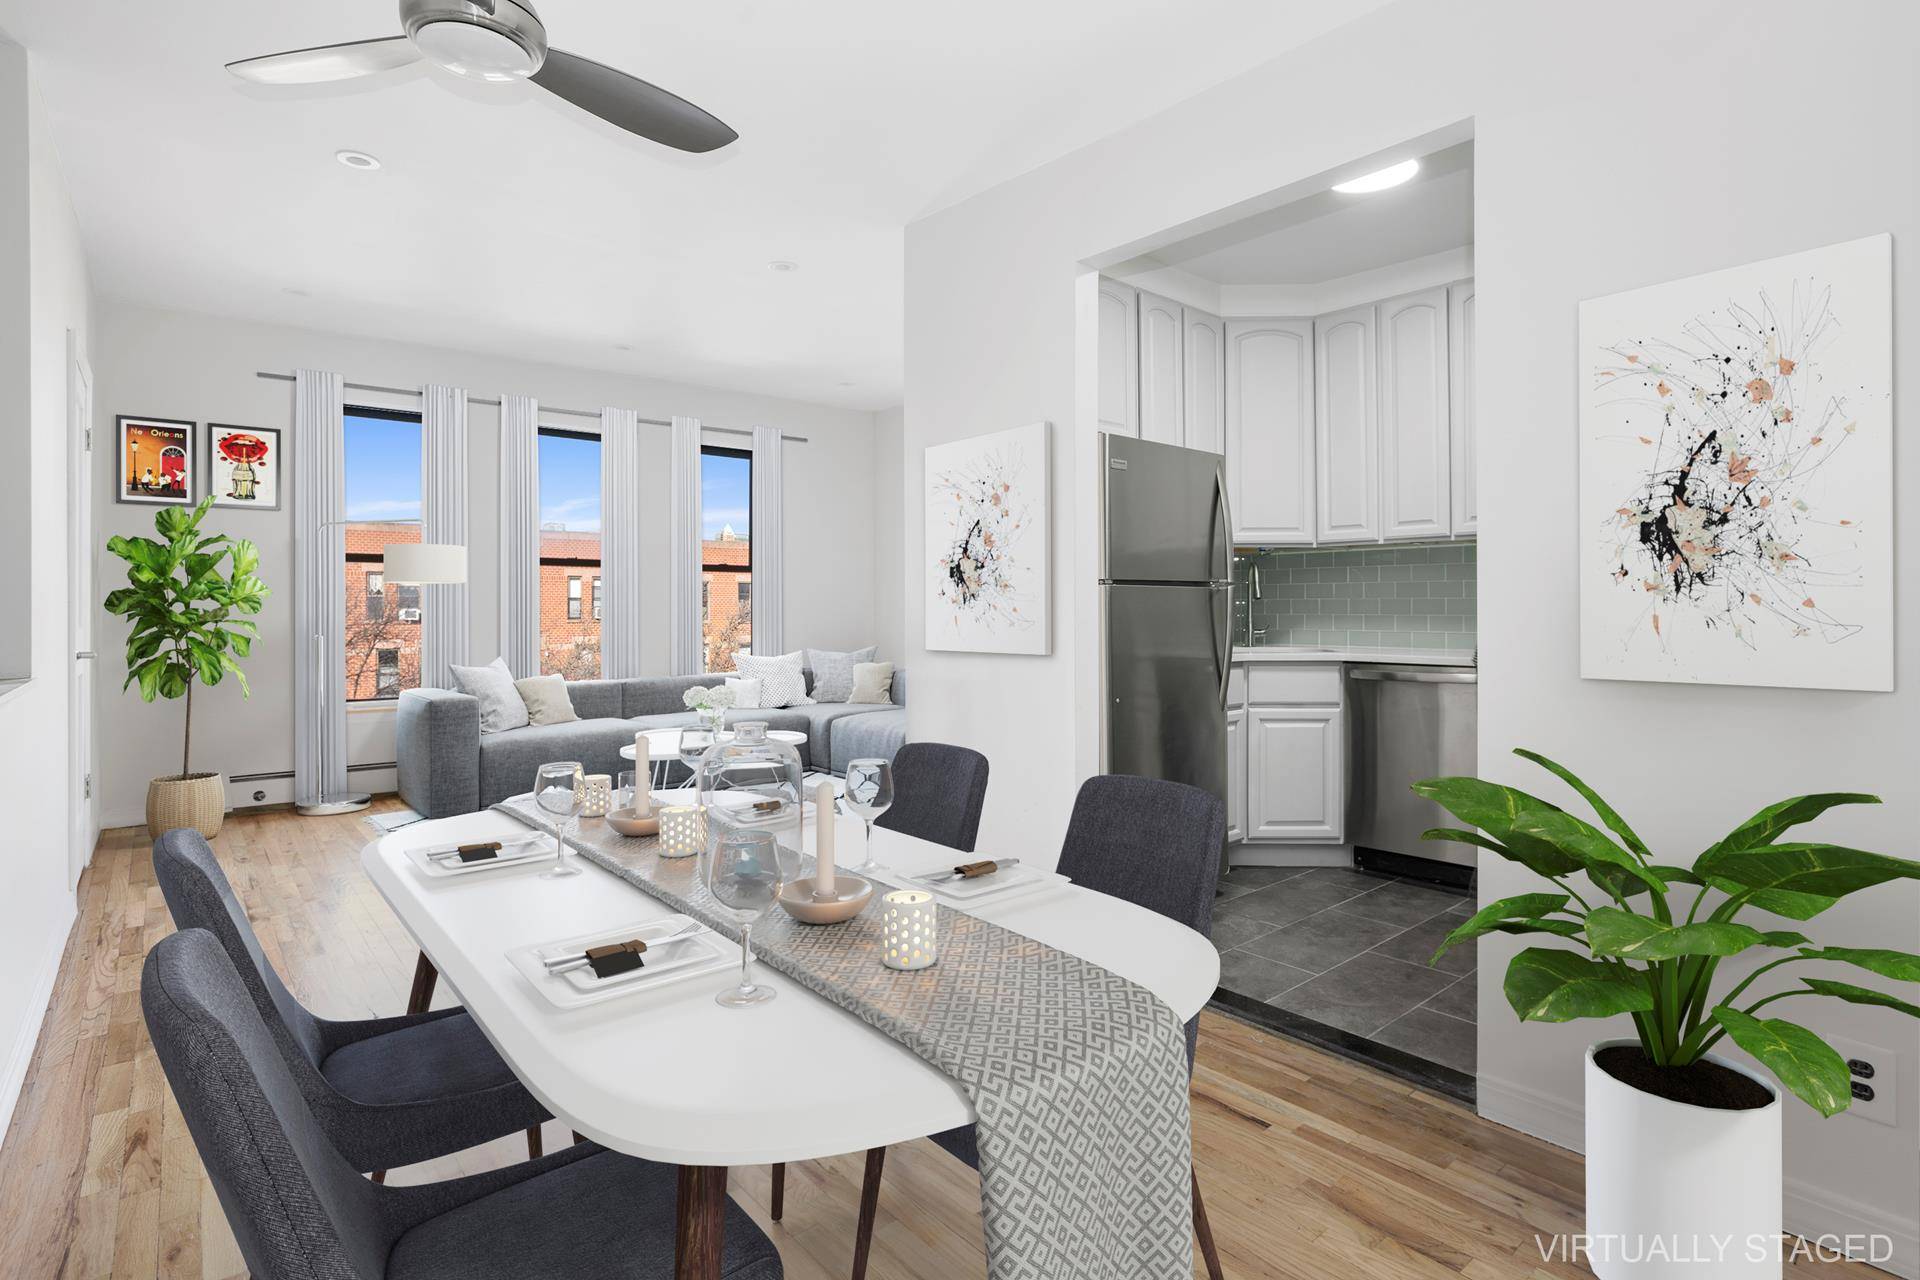 Rarely do you get the opportunity to live in an expansive 2 Bedroom 1 bath condominium that stretches across the entire floor of a three unit townhouse with Manhattan views ...